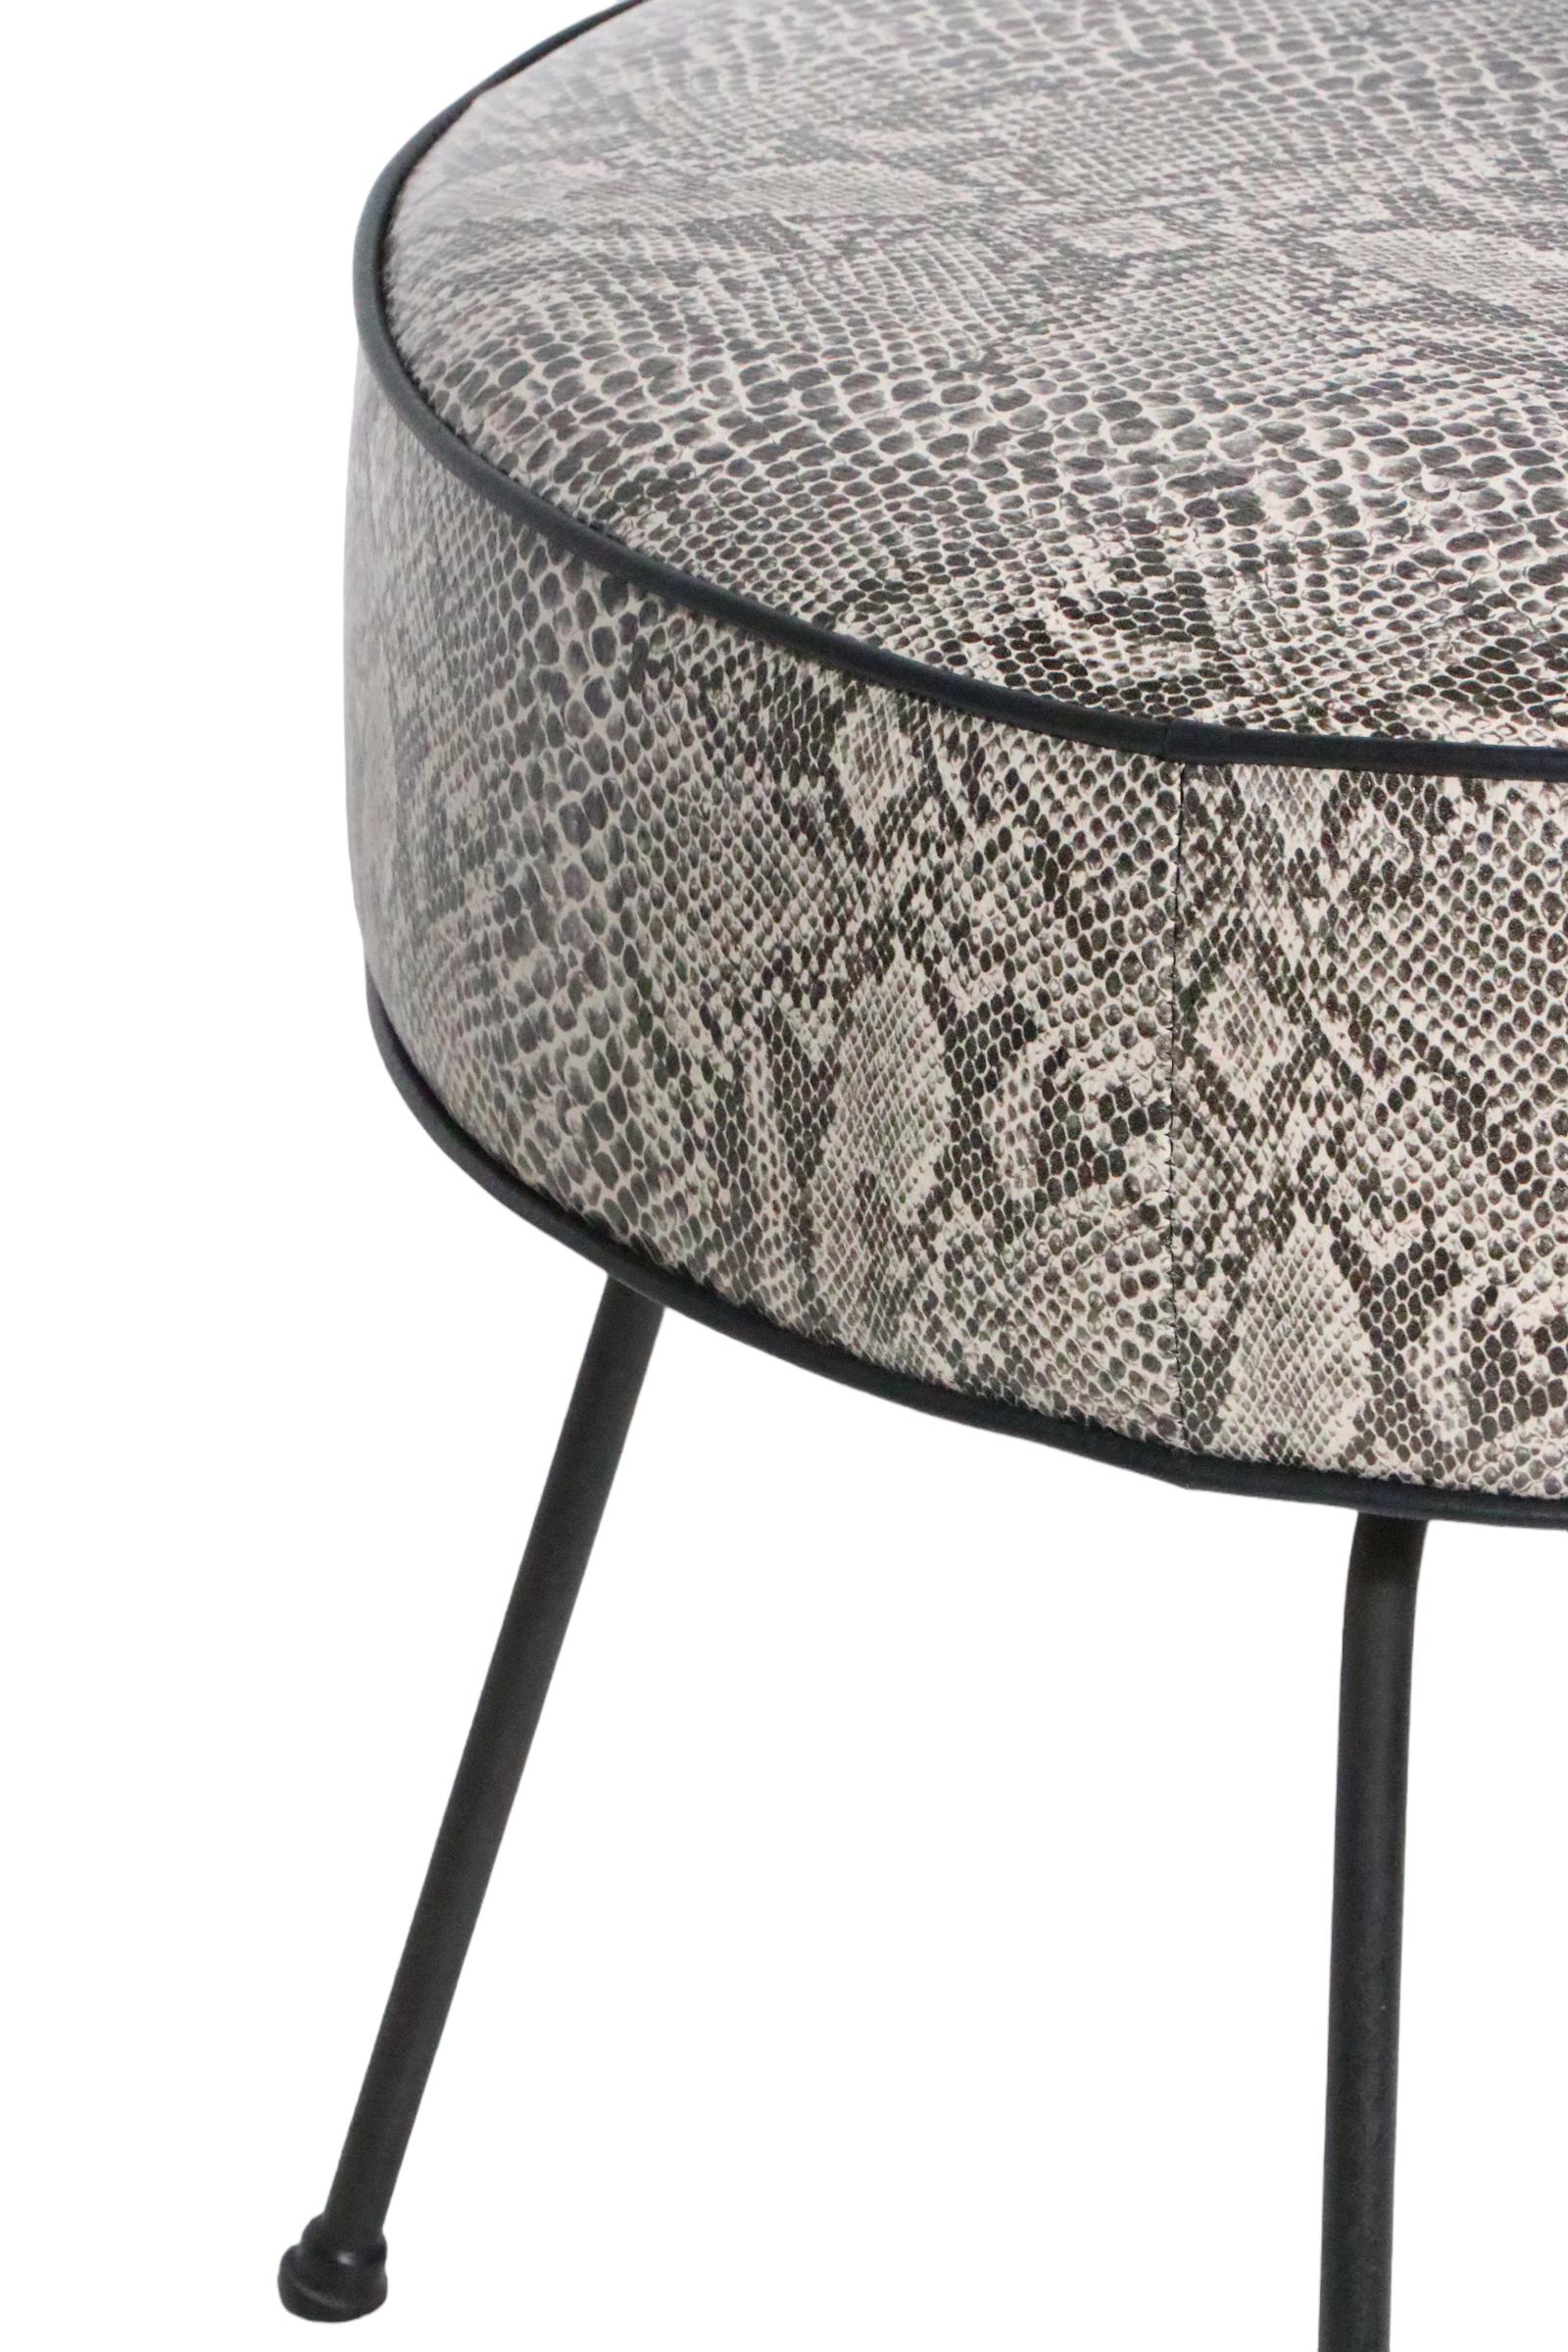 Mid-Century Modern Mid Century Foot Stool Pouf Ottoman Reupholstered in Black and White Faux Python